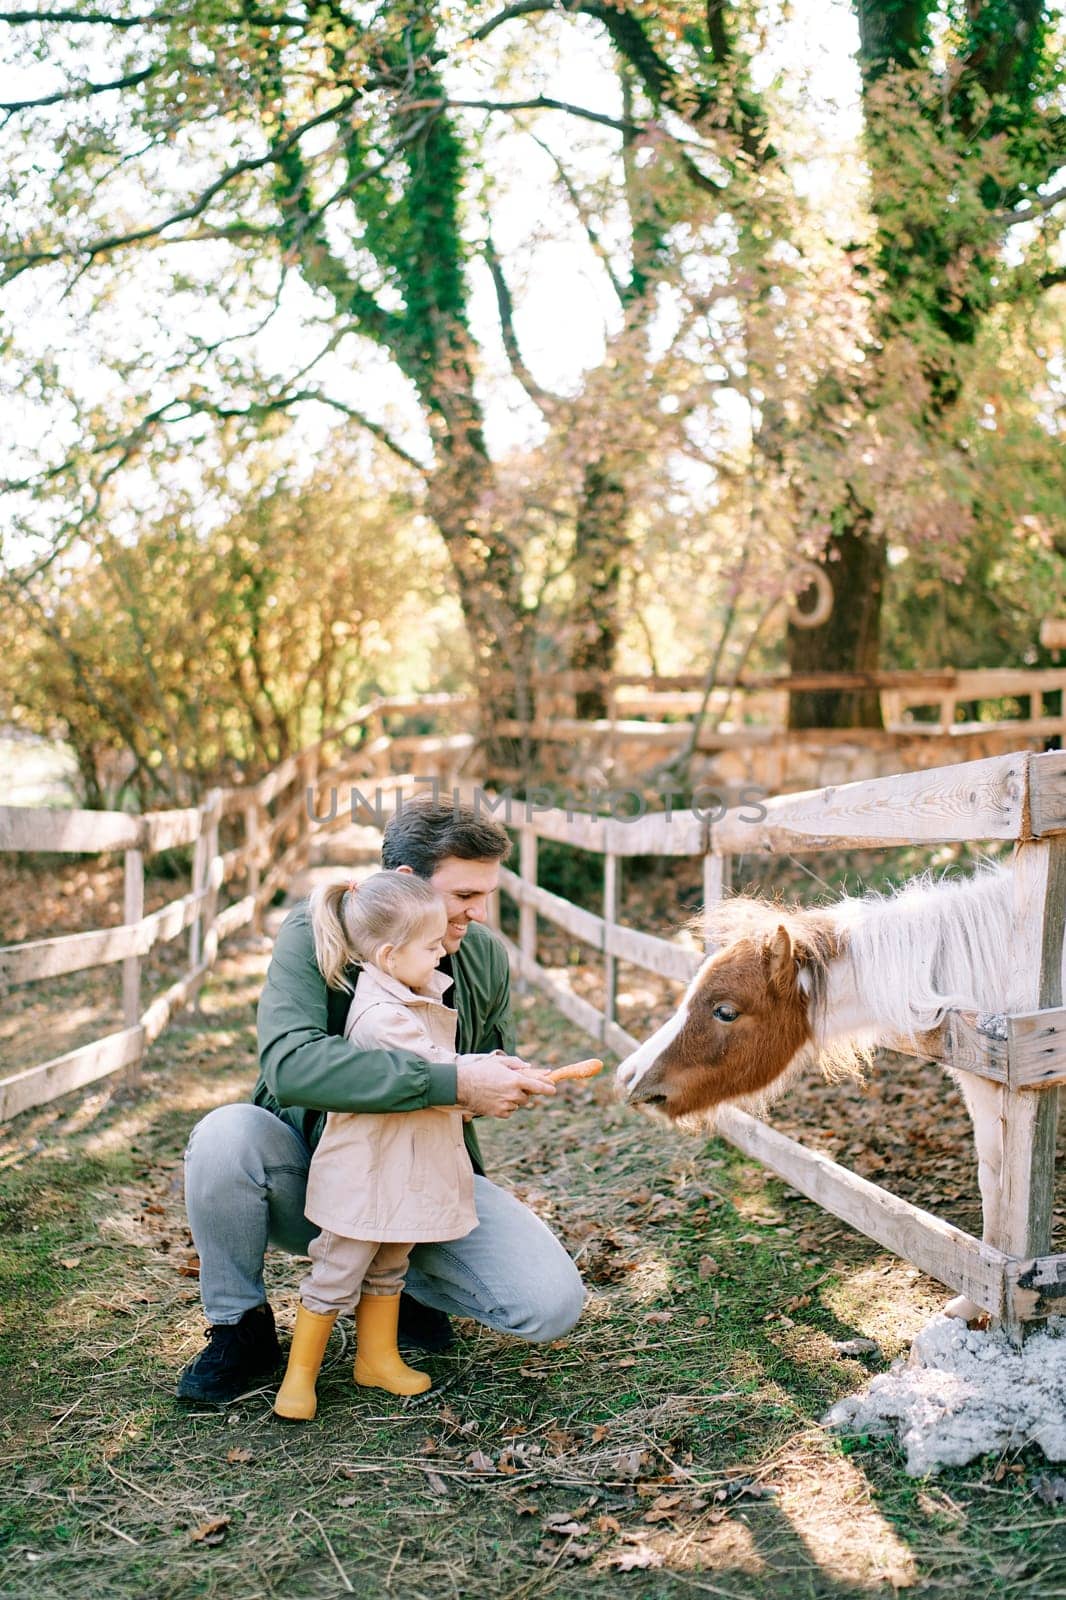 Little girl and her dad feed a pony poking its head out from behind a wooden fence by Nadtochiy